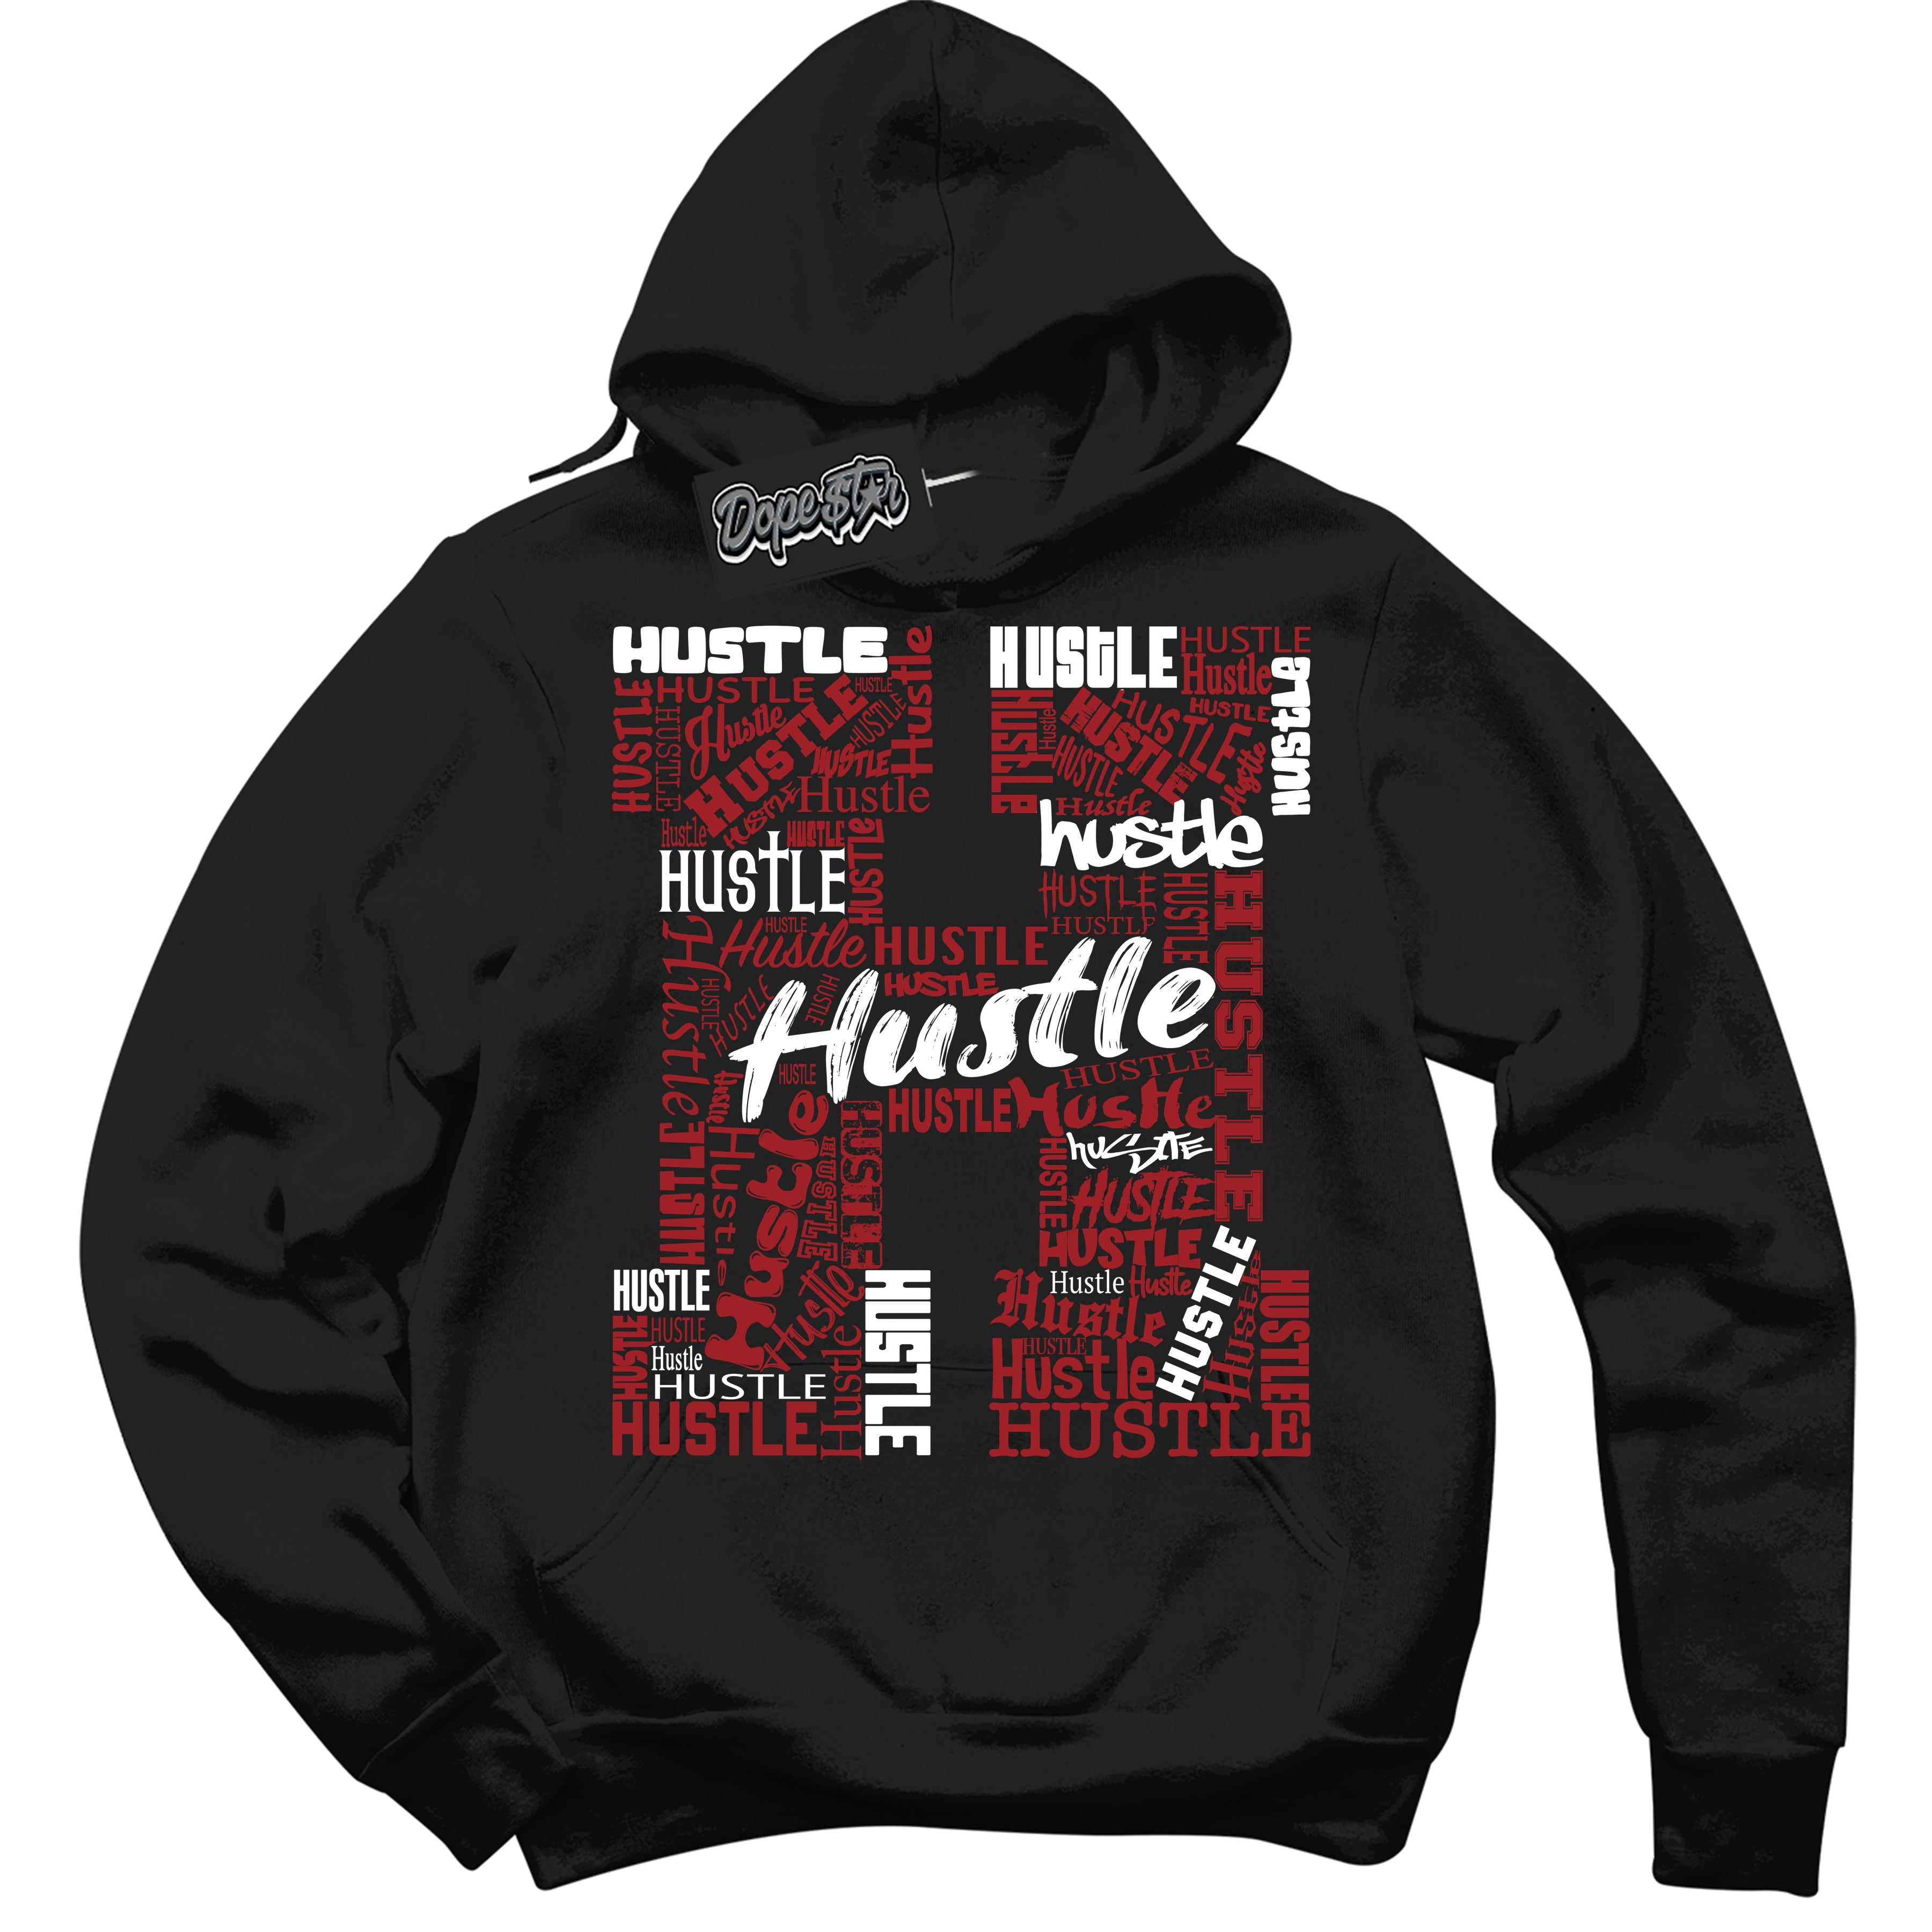 Cool Black Hoodie With “ Hustle H “ Design That Perfectly Matches Lost And Found 1s Sneakers